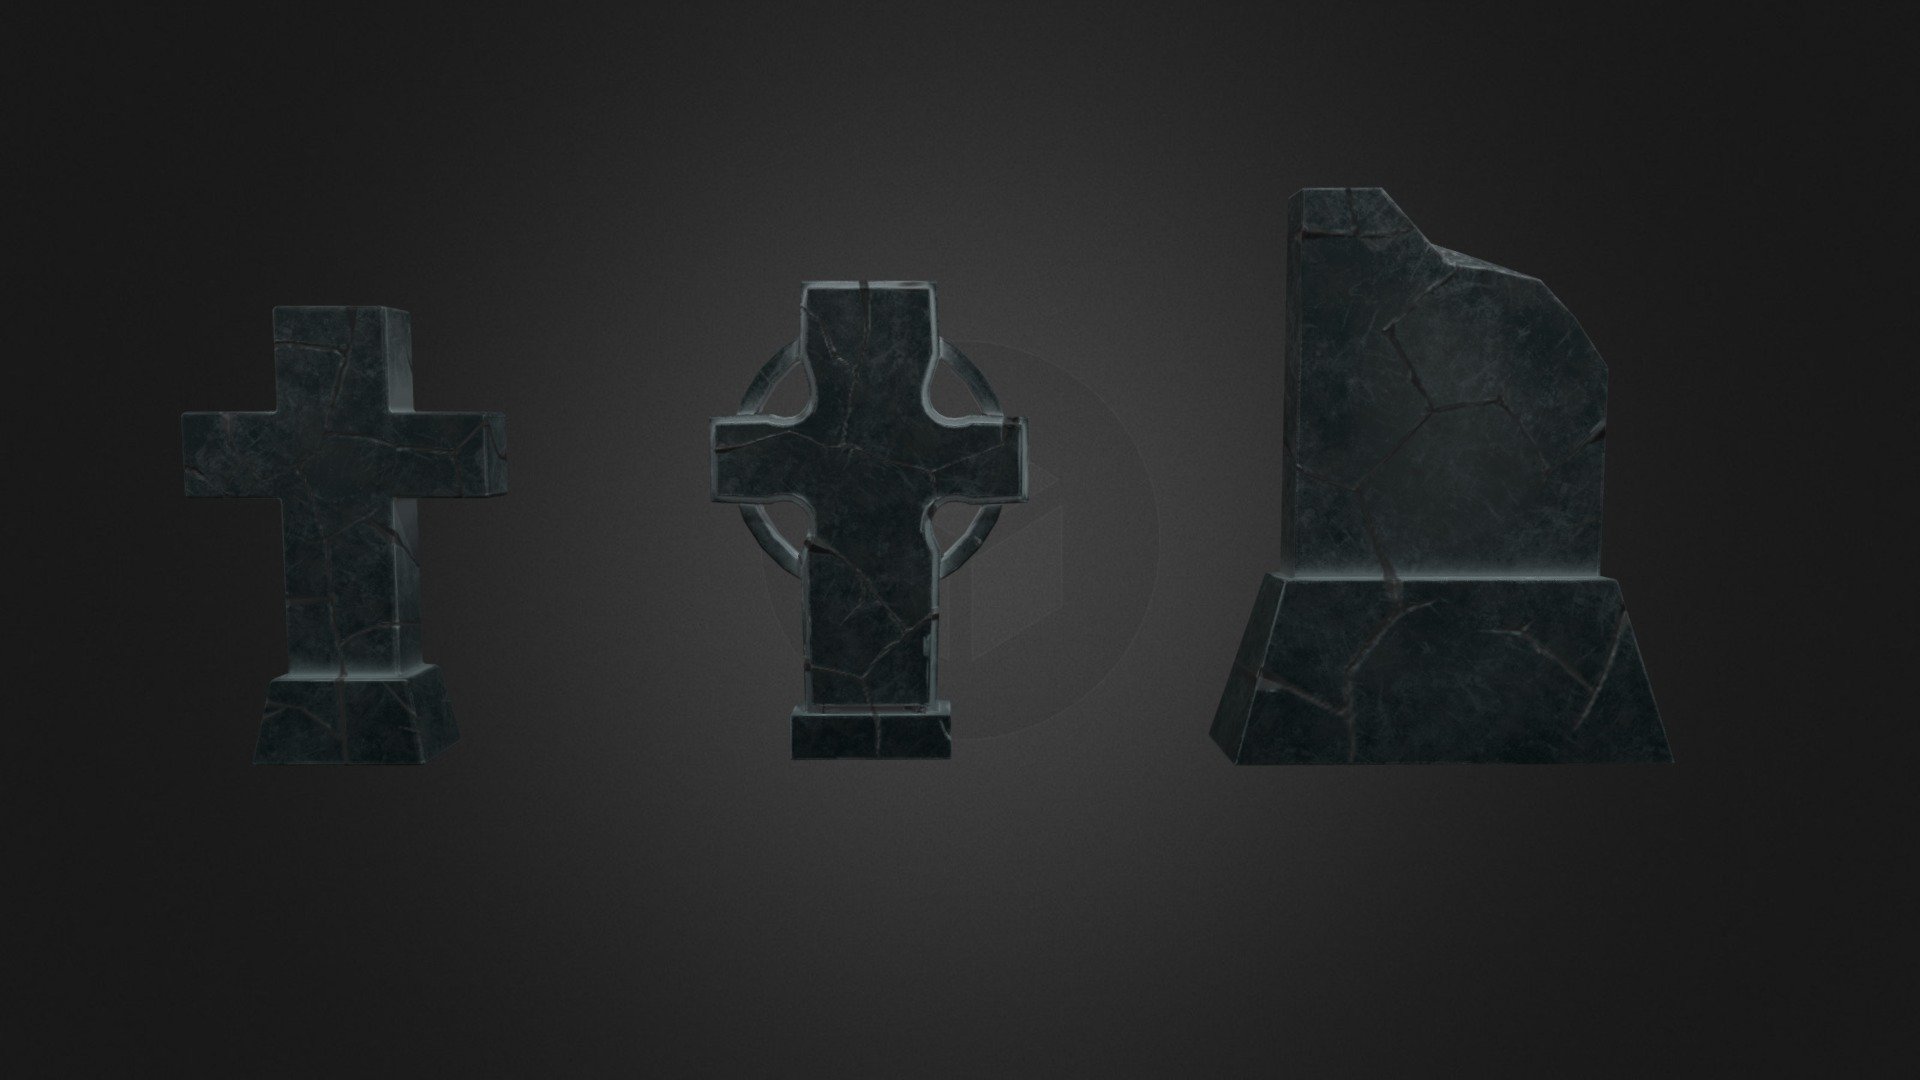 These assets were created for the Stylized Graveyard environment 3d model